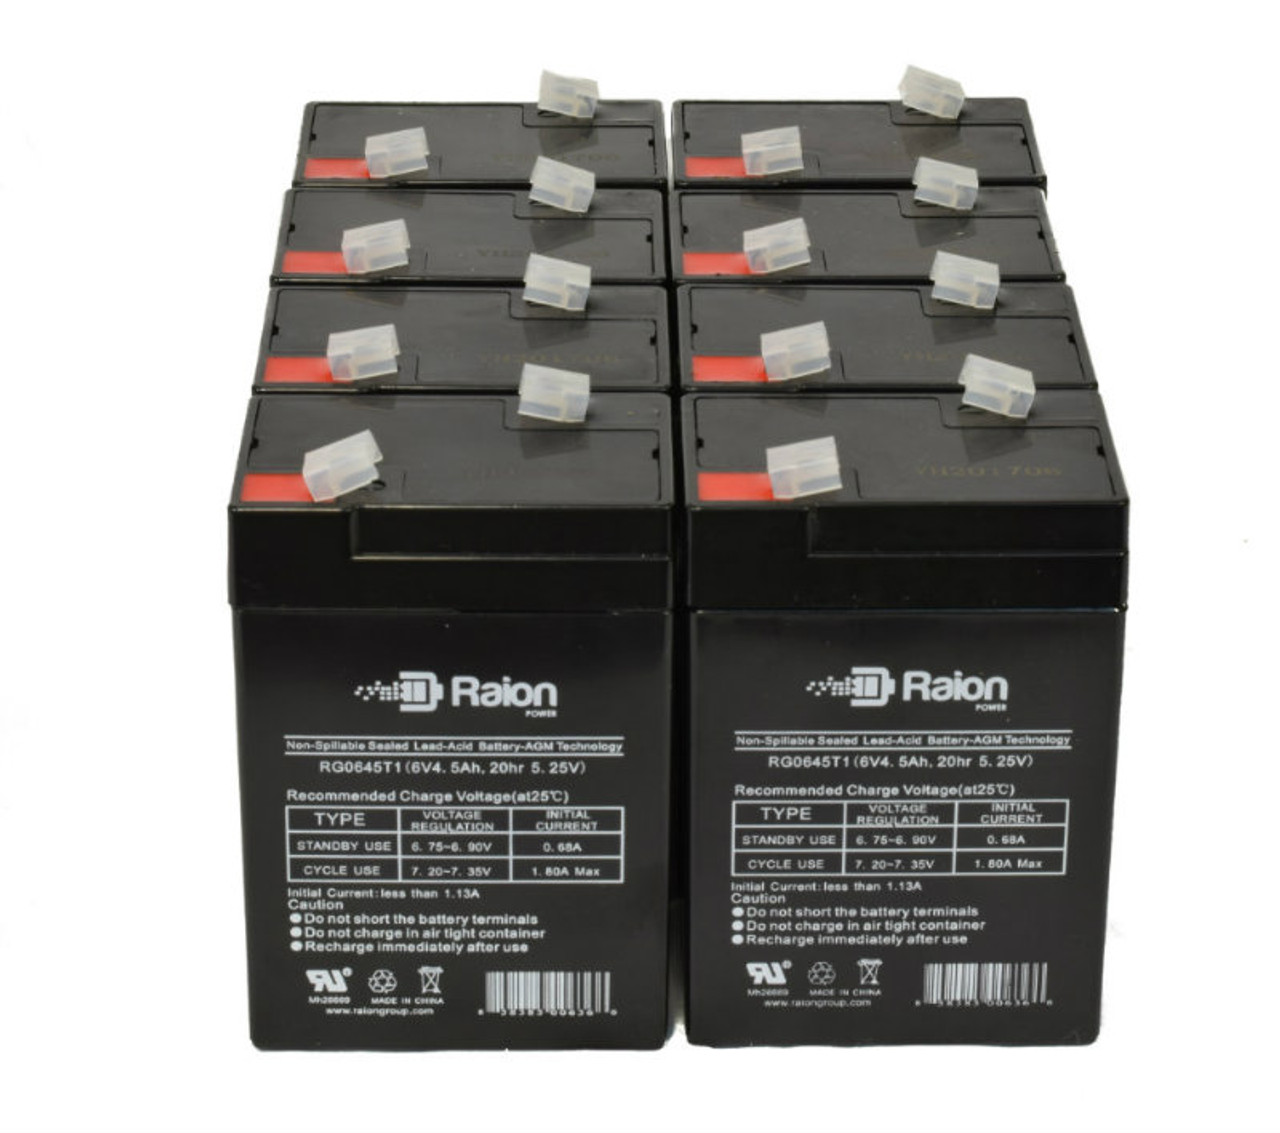 Raion Power 6V 4.5Ah Replacement Emergency Light Battery for National Power Corporation GS012P1 - 8 Pack